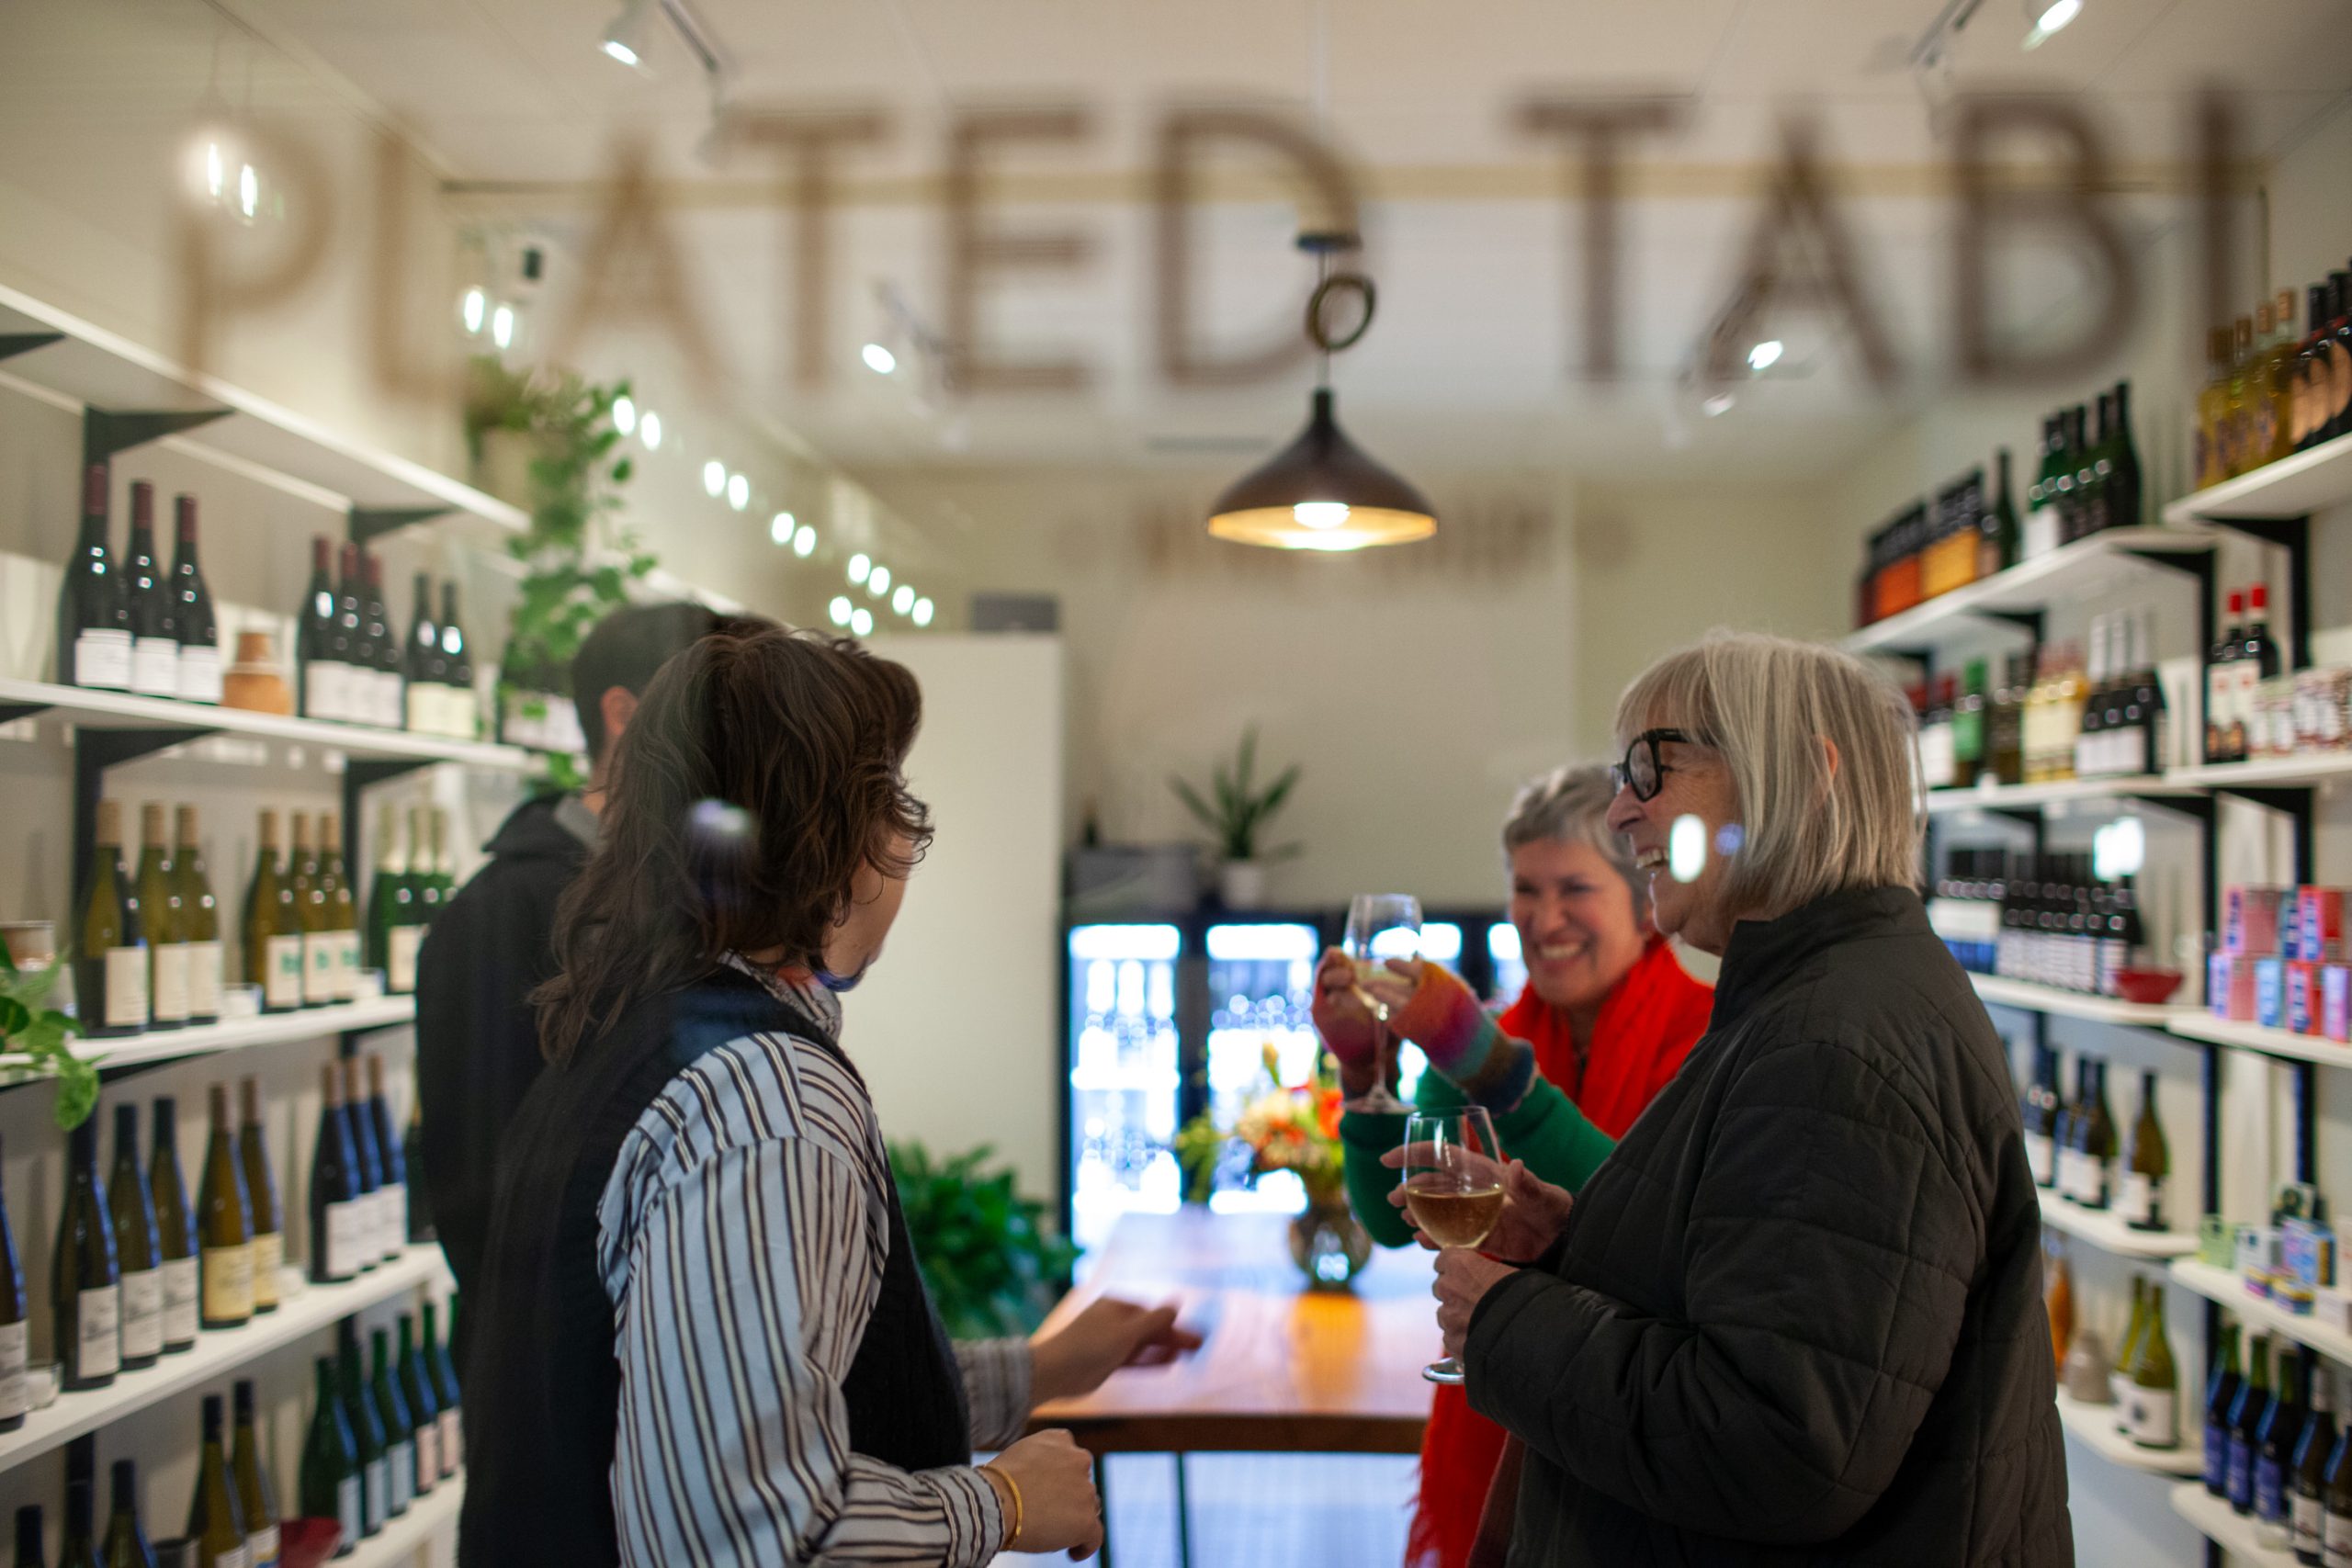 Plated Table's downtown location is now home to a wine shop and event space at 625 S. Dubuque St., across from Iowa City’s historic train depot.